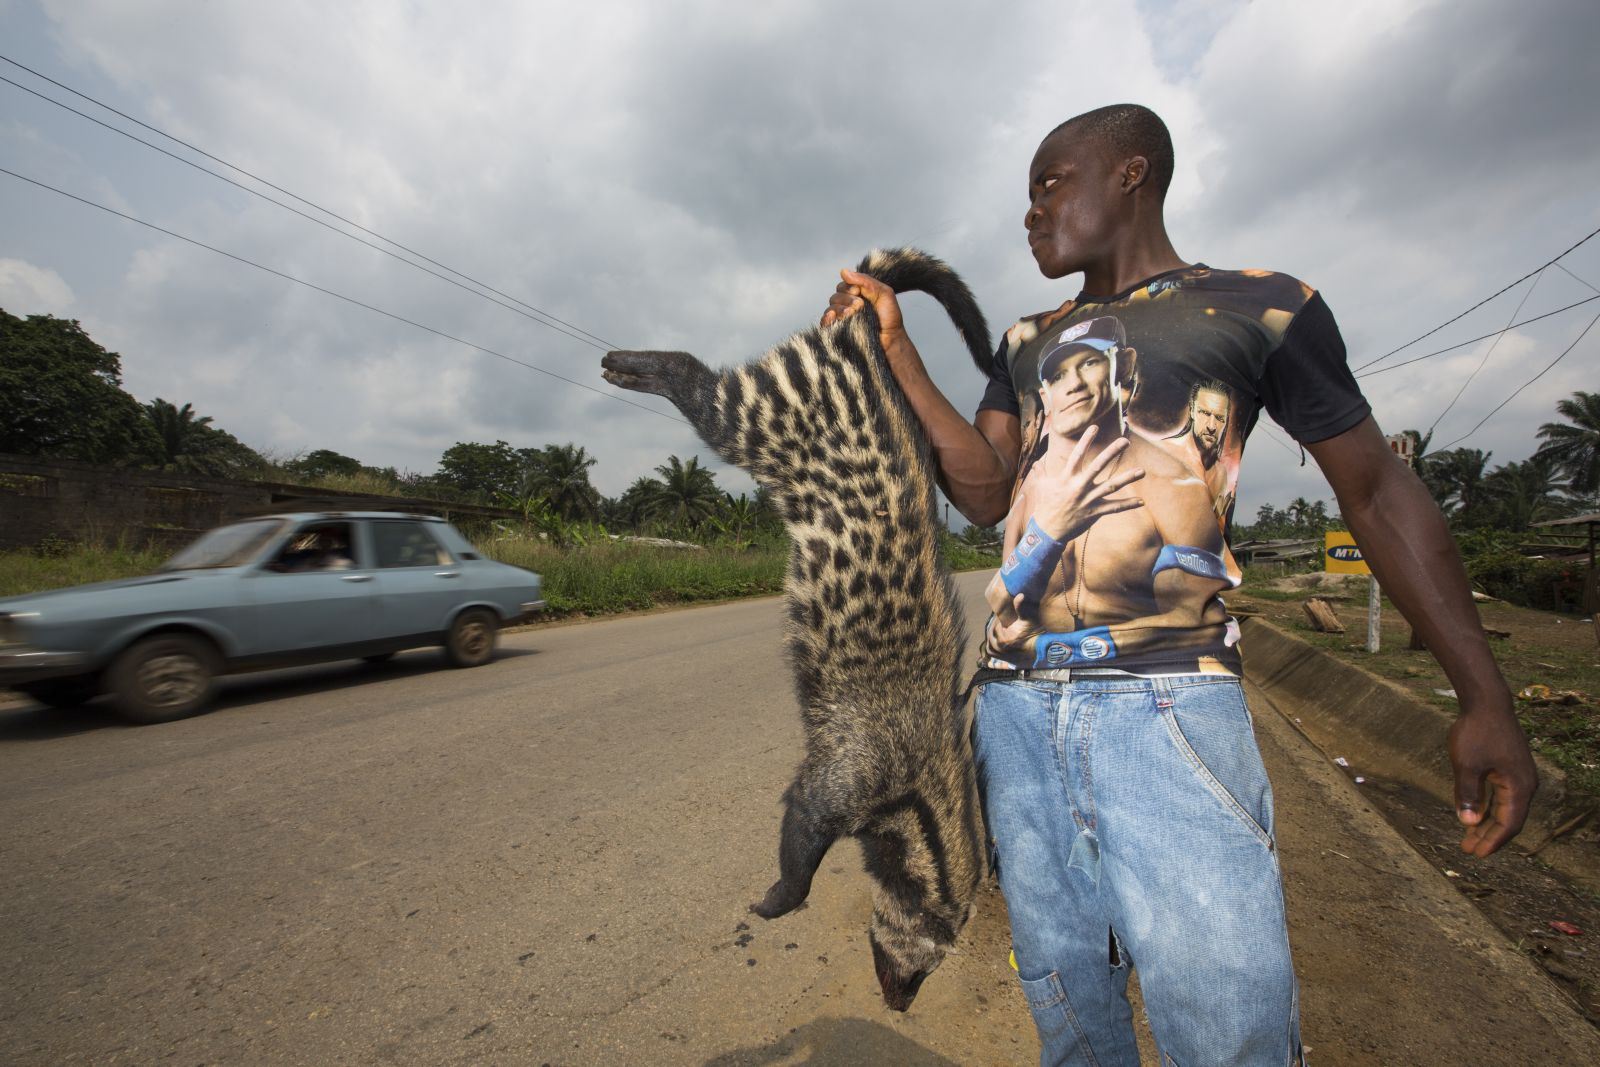 Wildlife may be infectious – a man wants to sell a poached civet cat.